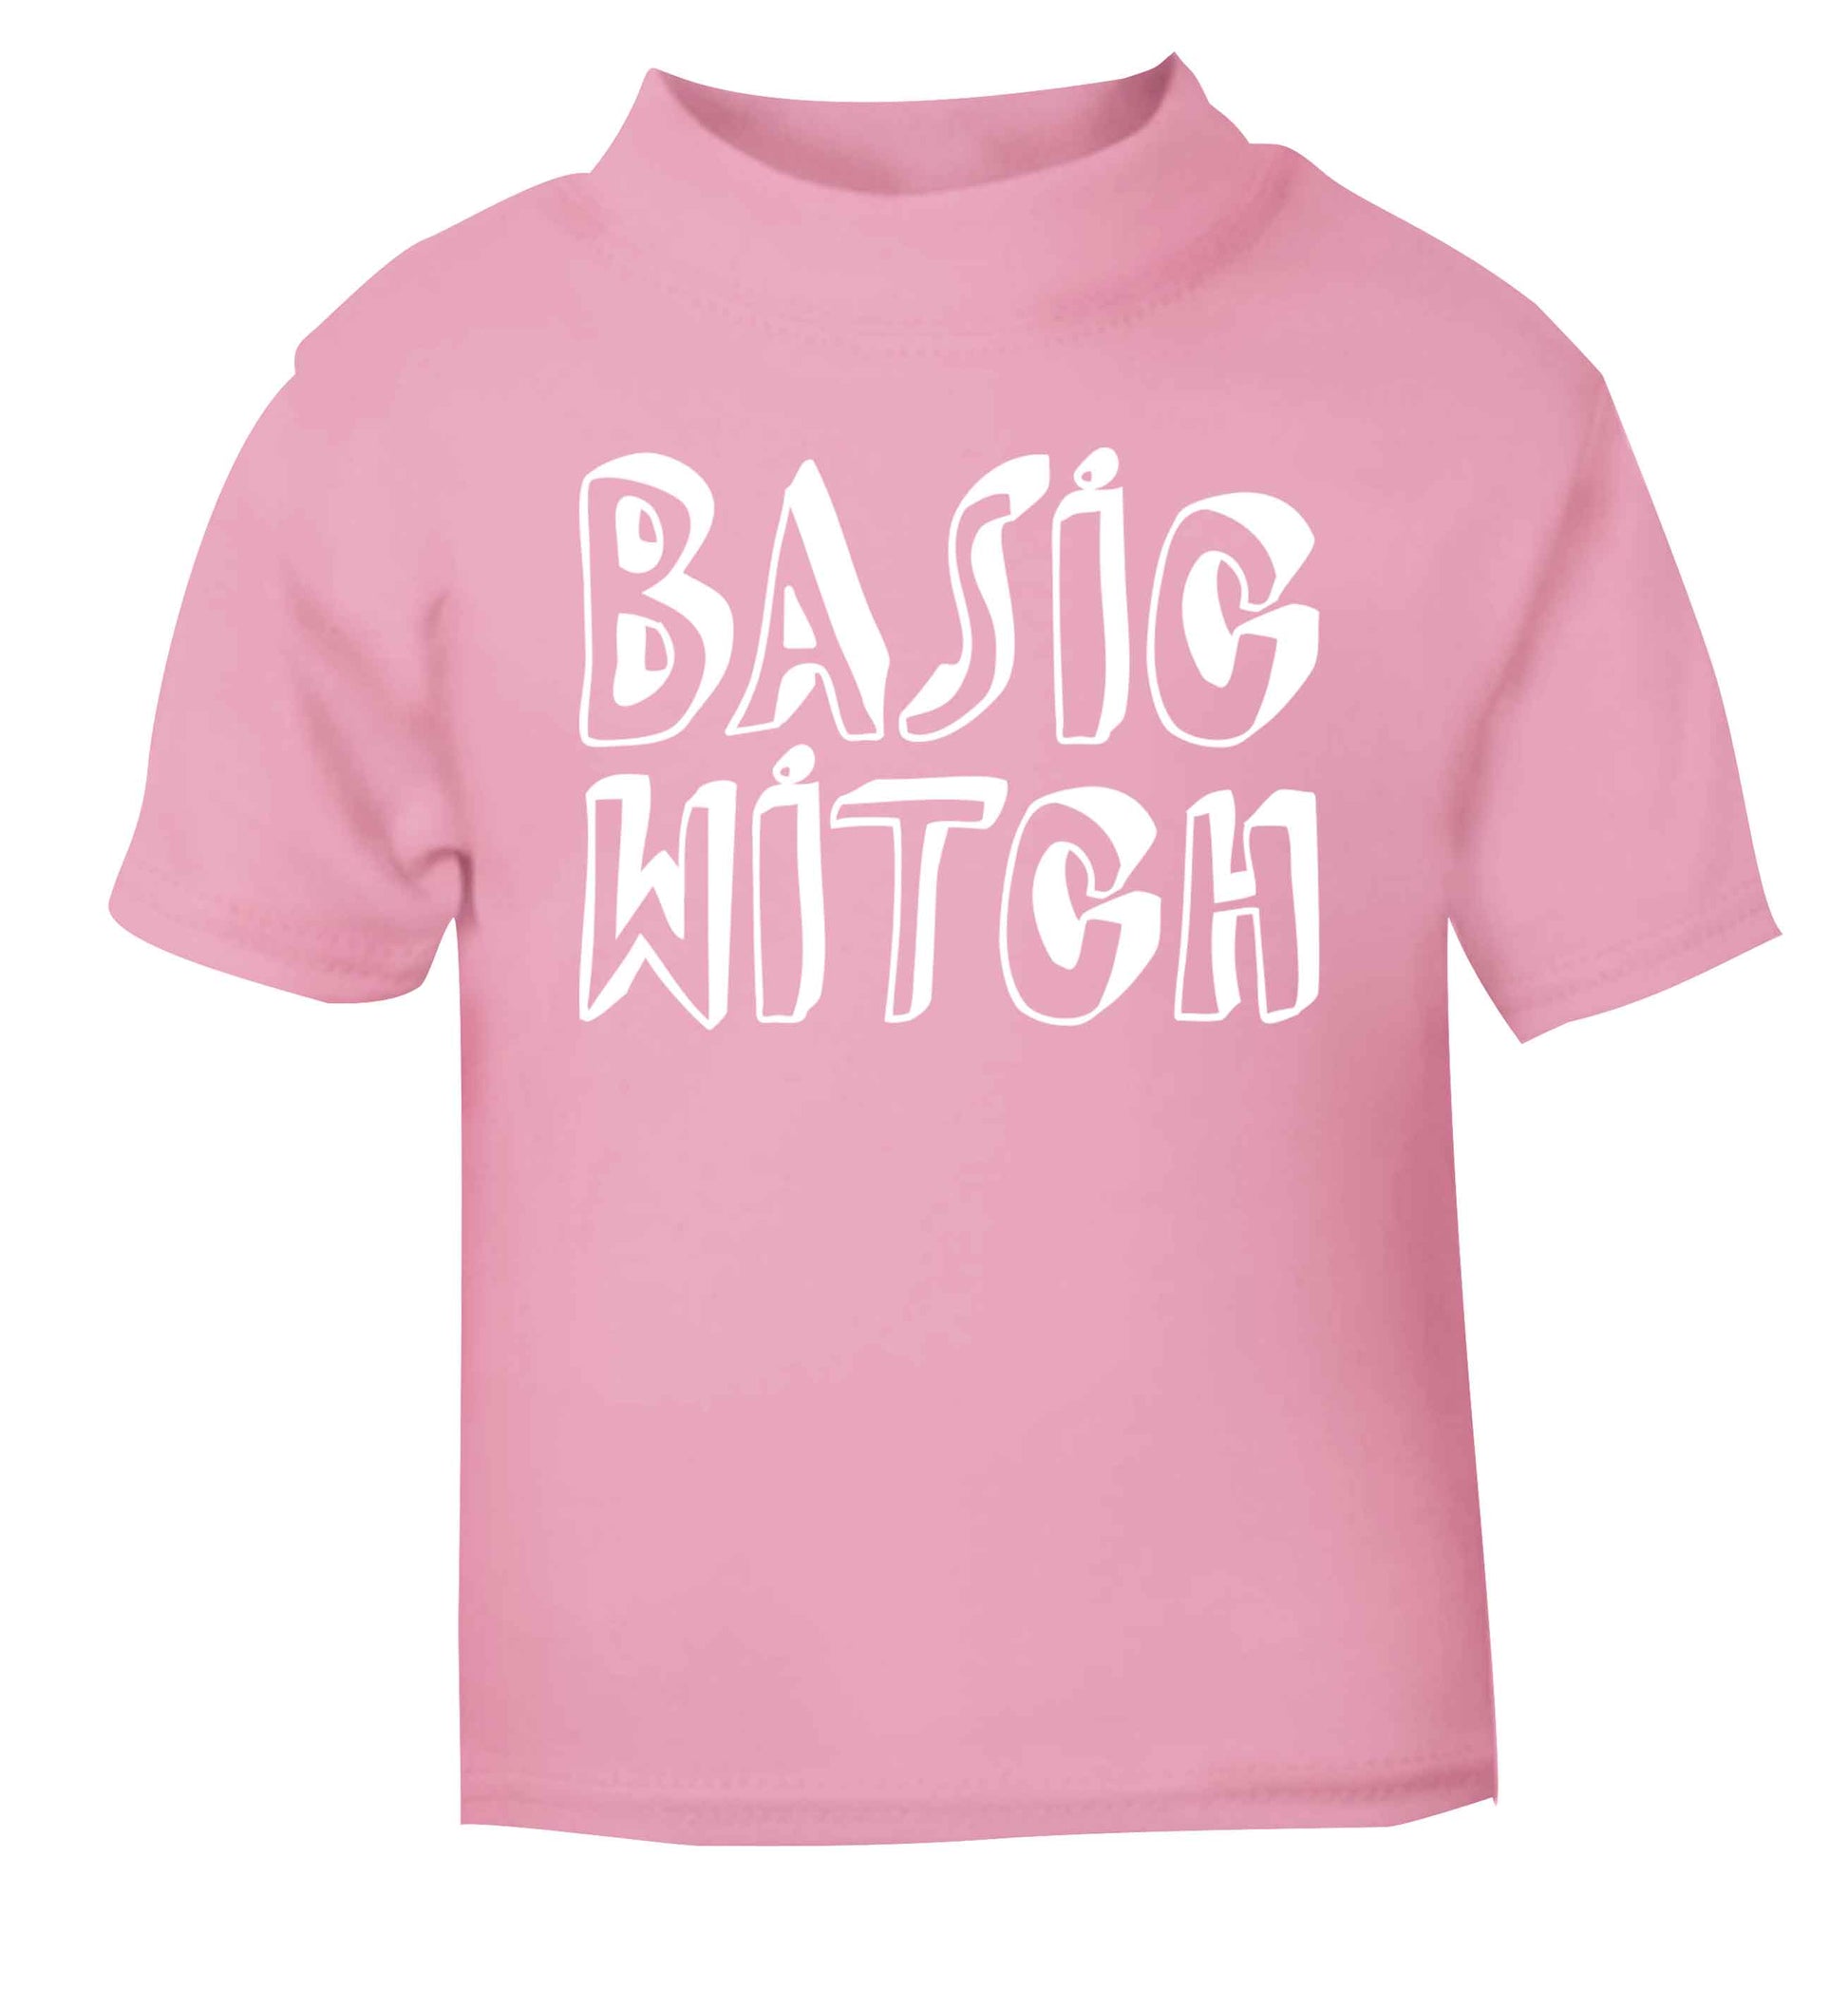 Basic witch light pink baby toddler Tshirt 2 Years